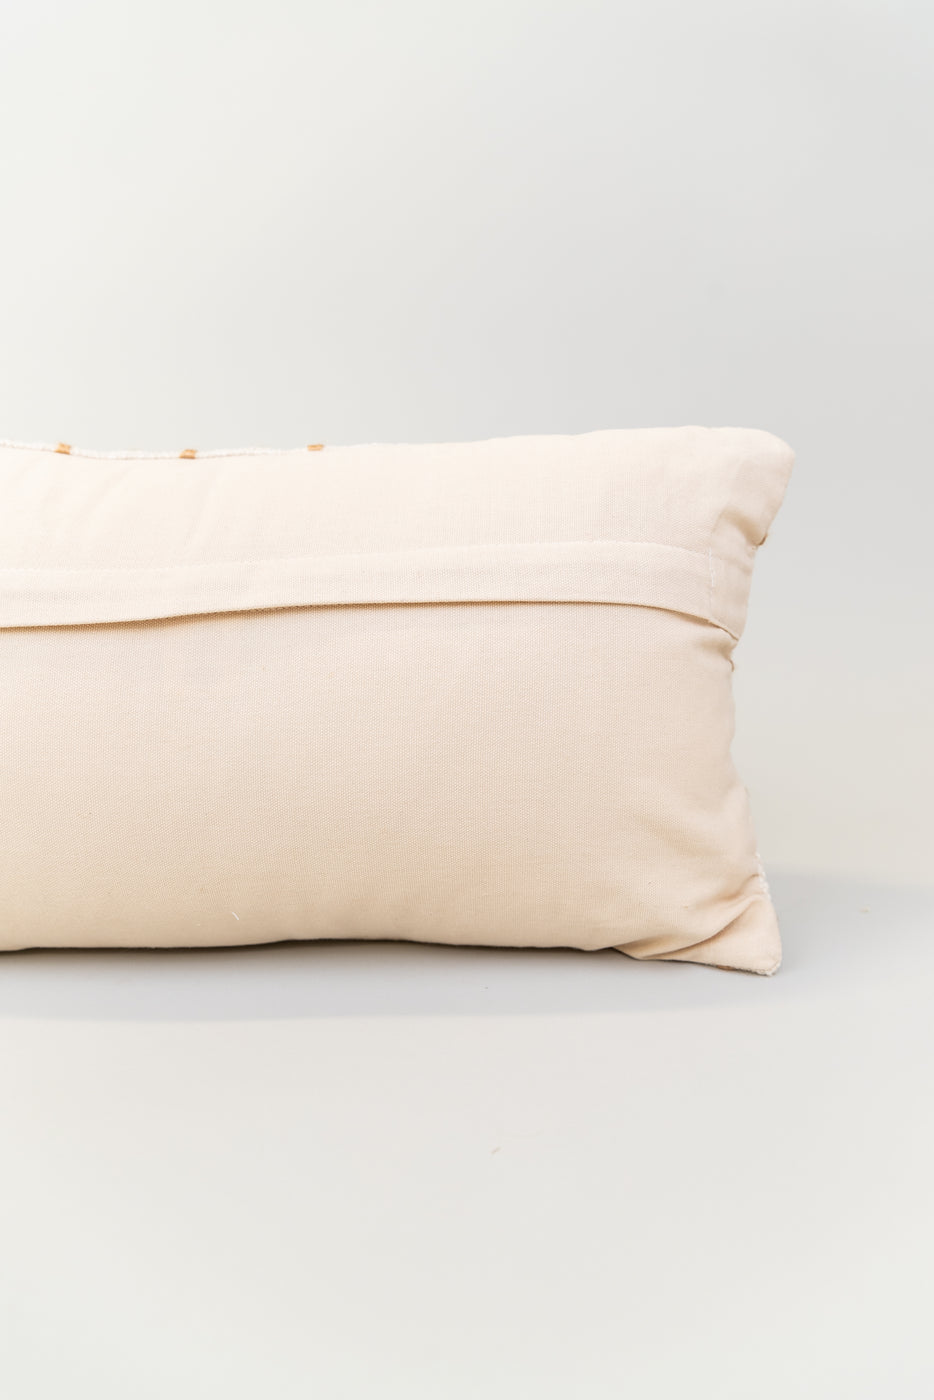 a white pillow on a white surface